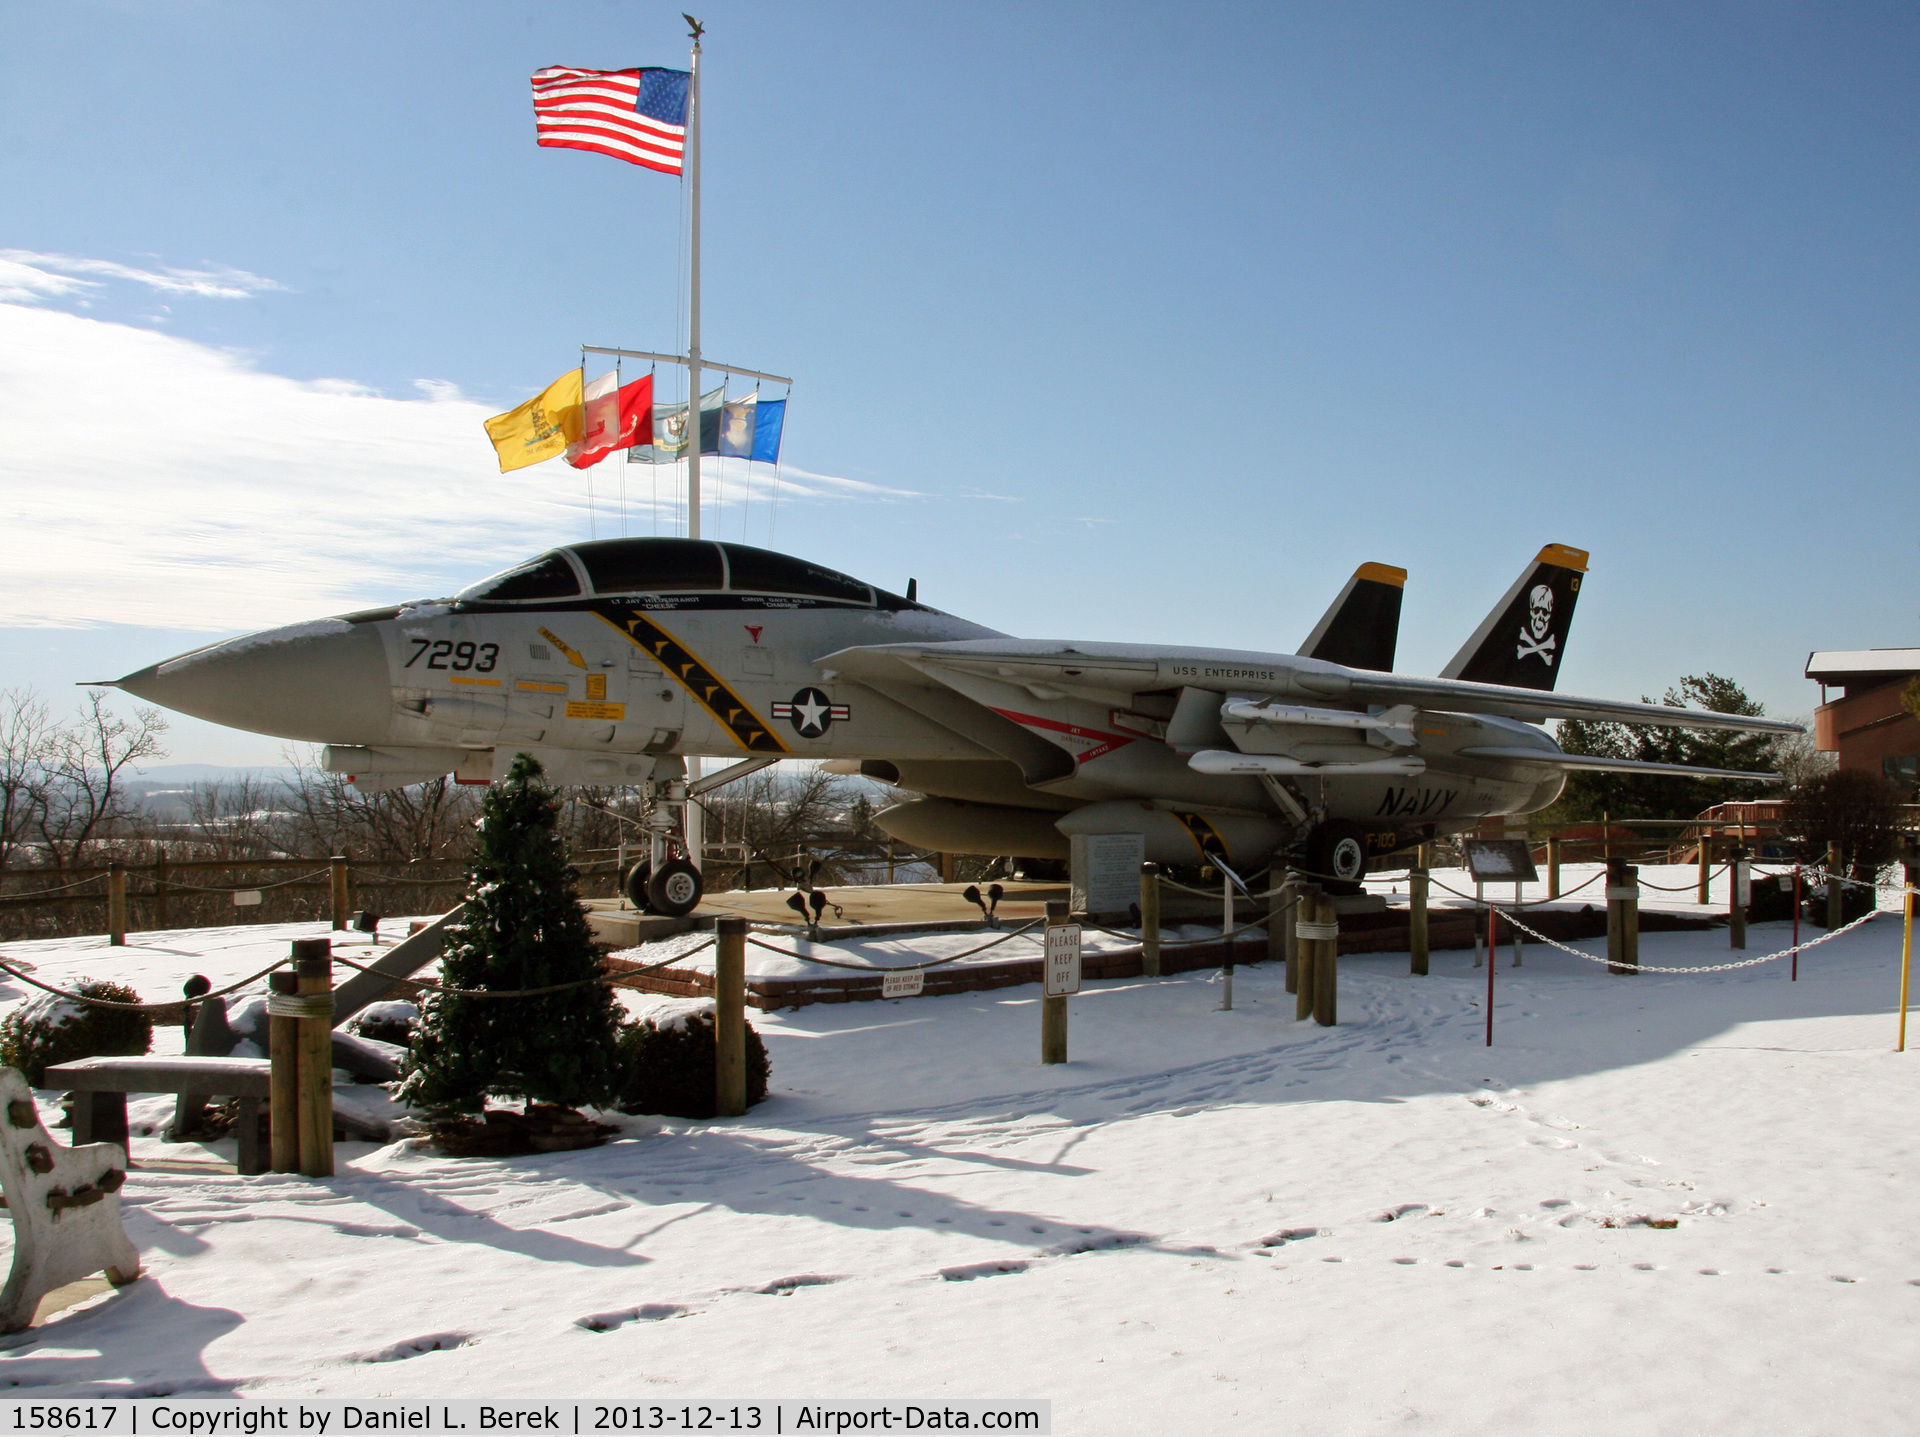 158617, Grumman F-14A Tomcat C/N 18, This fine Tomcat is on display at the VFW Post 7293, Whitehall, PA.